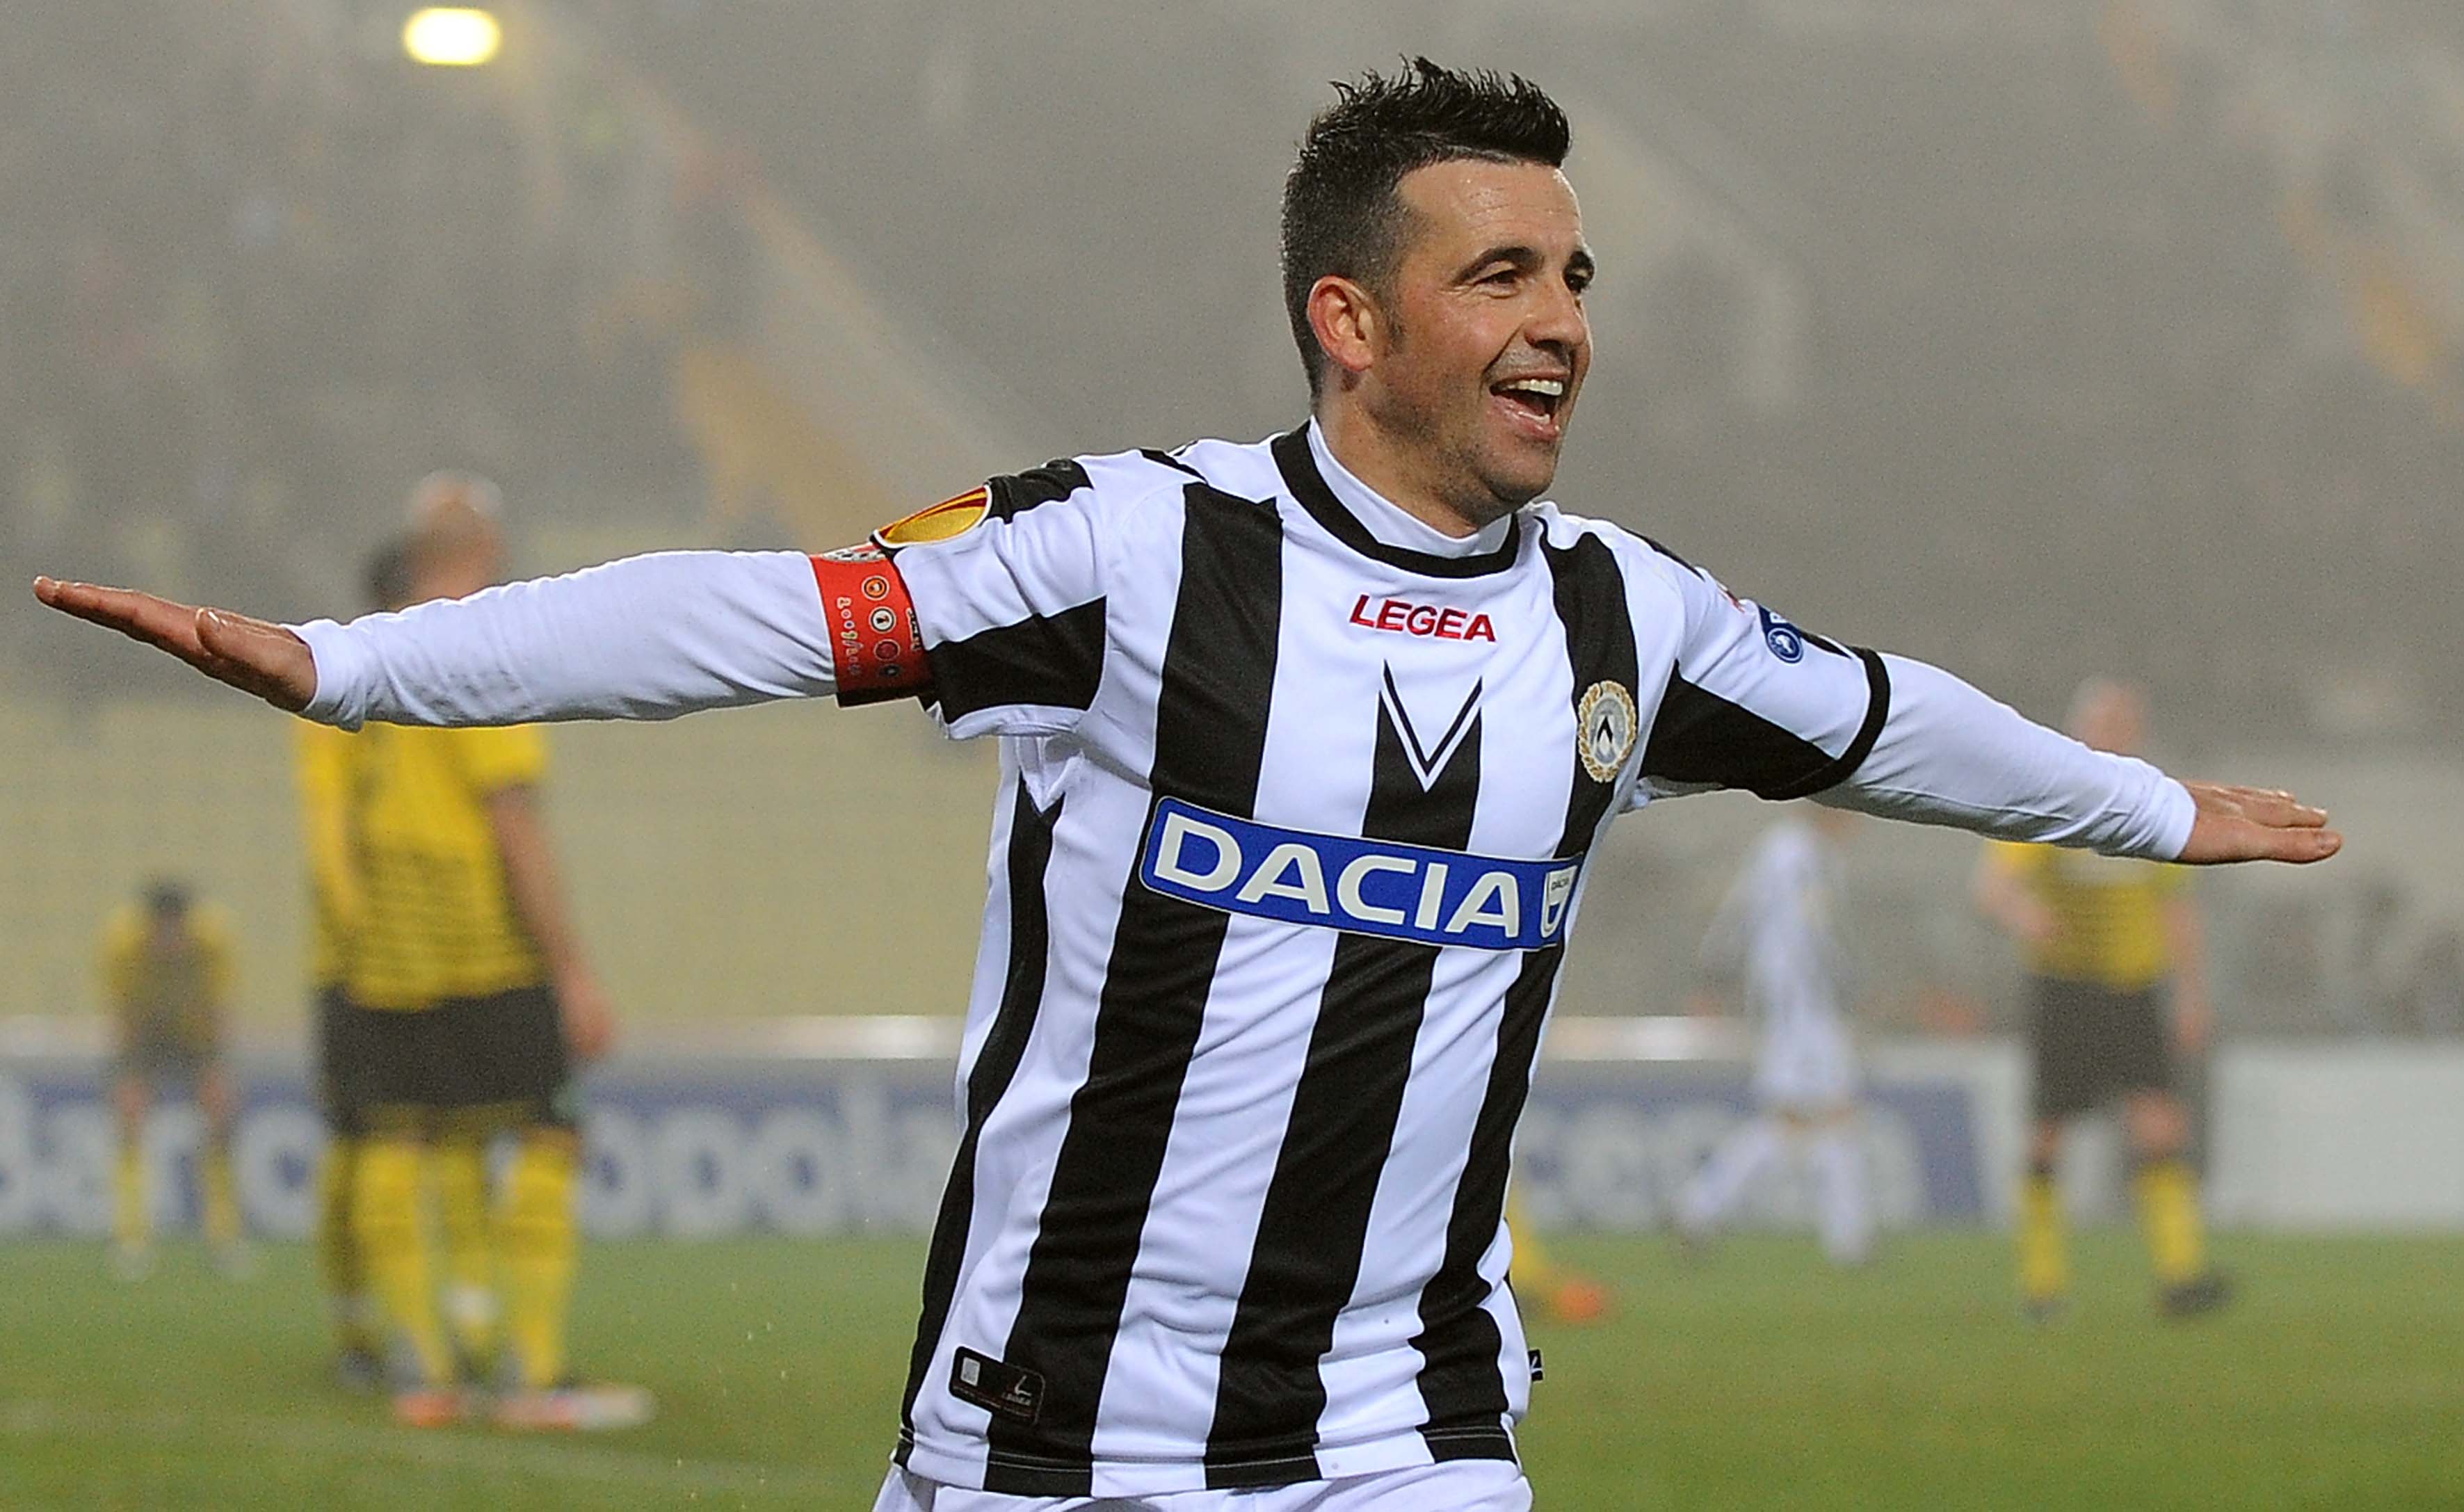 Udinese's Antonio Di Natale celebrates after scoring a goal during an UEFA Europa League football match between Udinese and Celtic Glasgow at Friuli Stadium in Udine on December 15, 2011.  AFP PHOTO / ANTEPRIMA